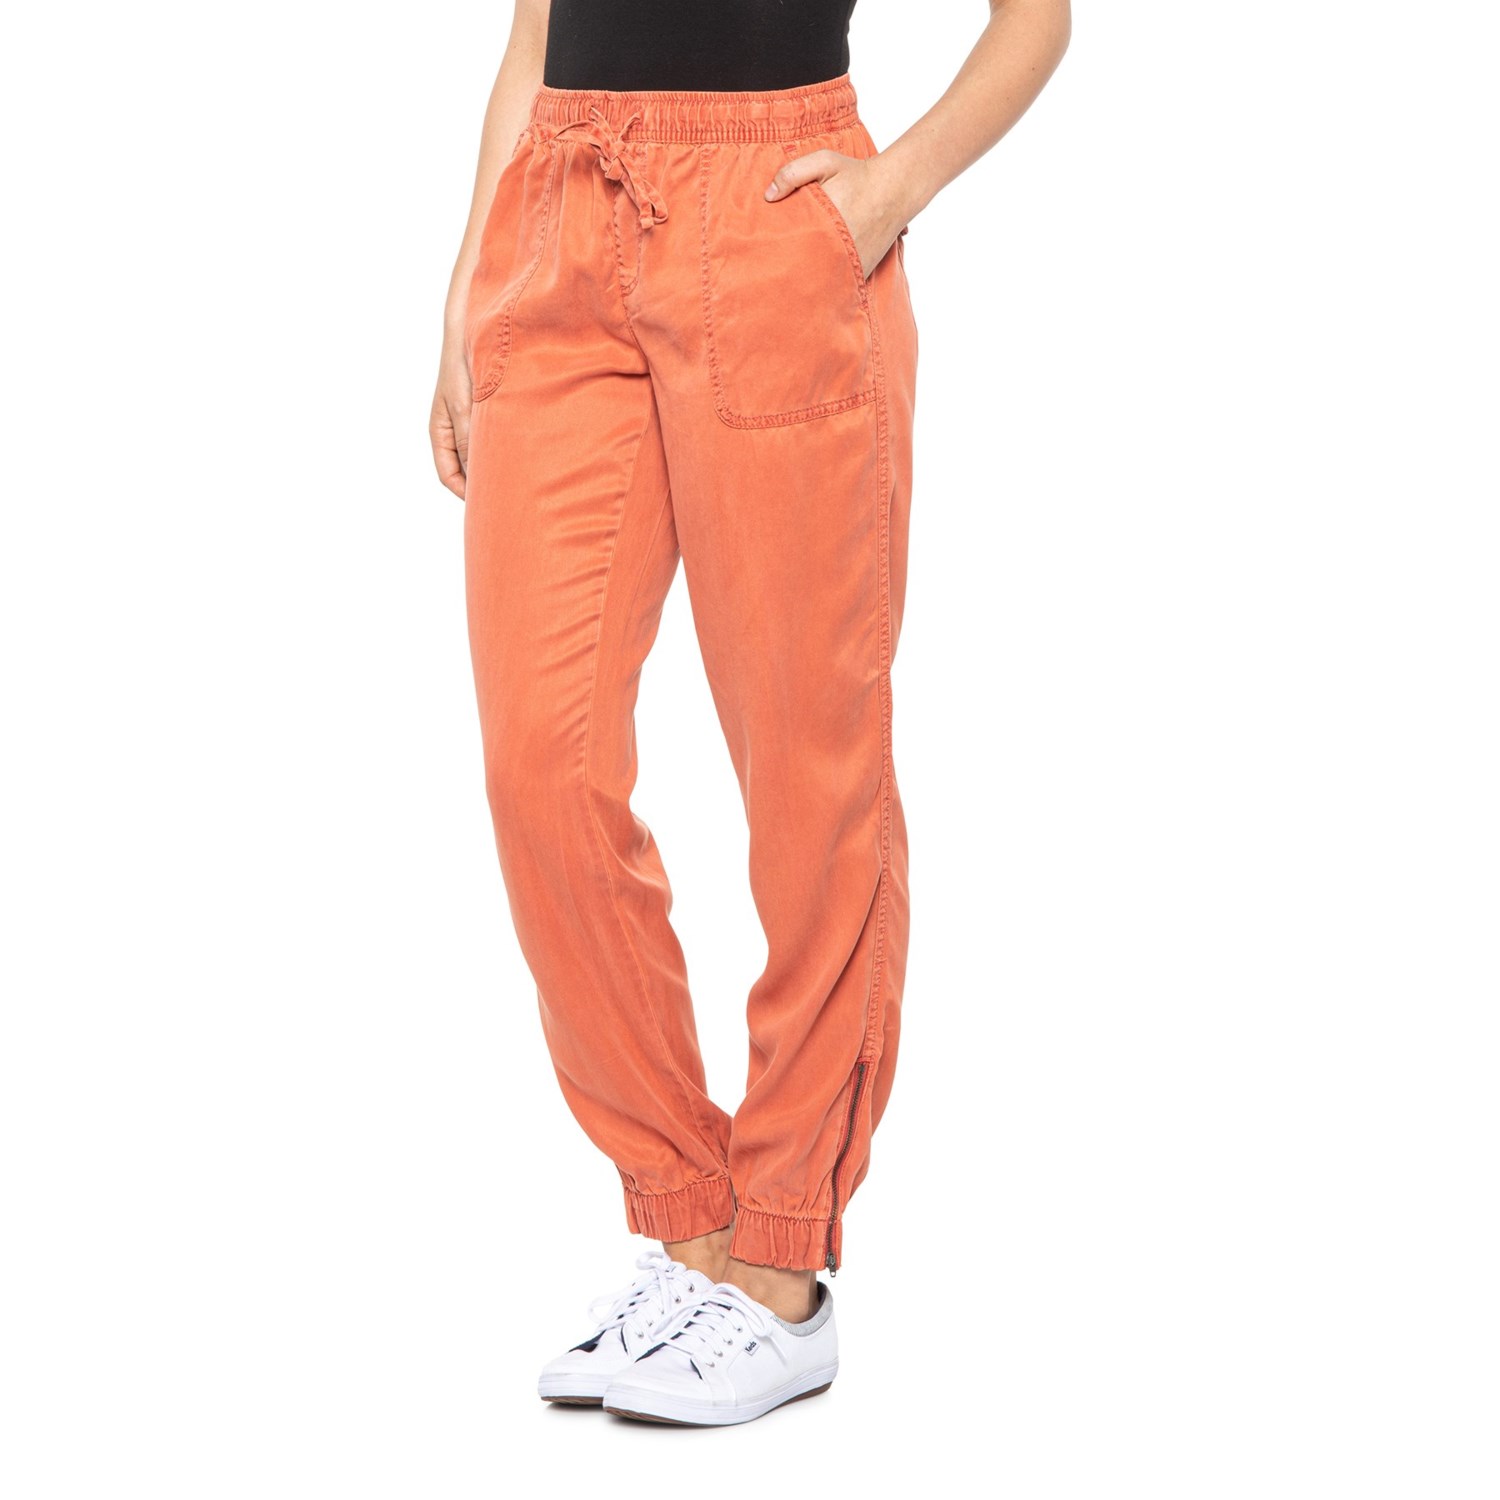 C&C California Ankle Zip 100% Lyocell Joggers (For Women) - Save 52%